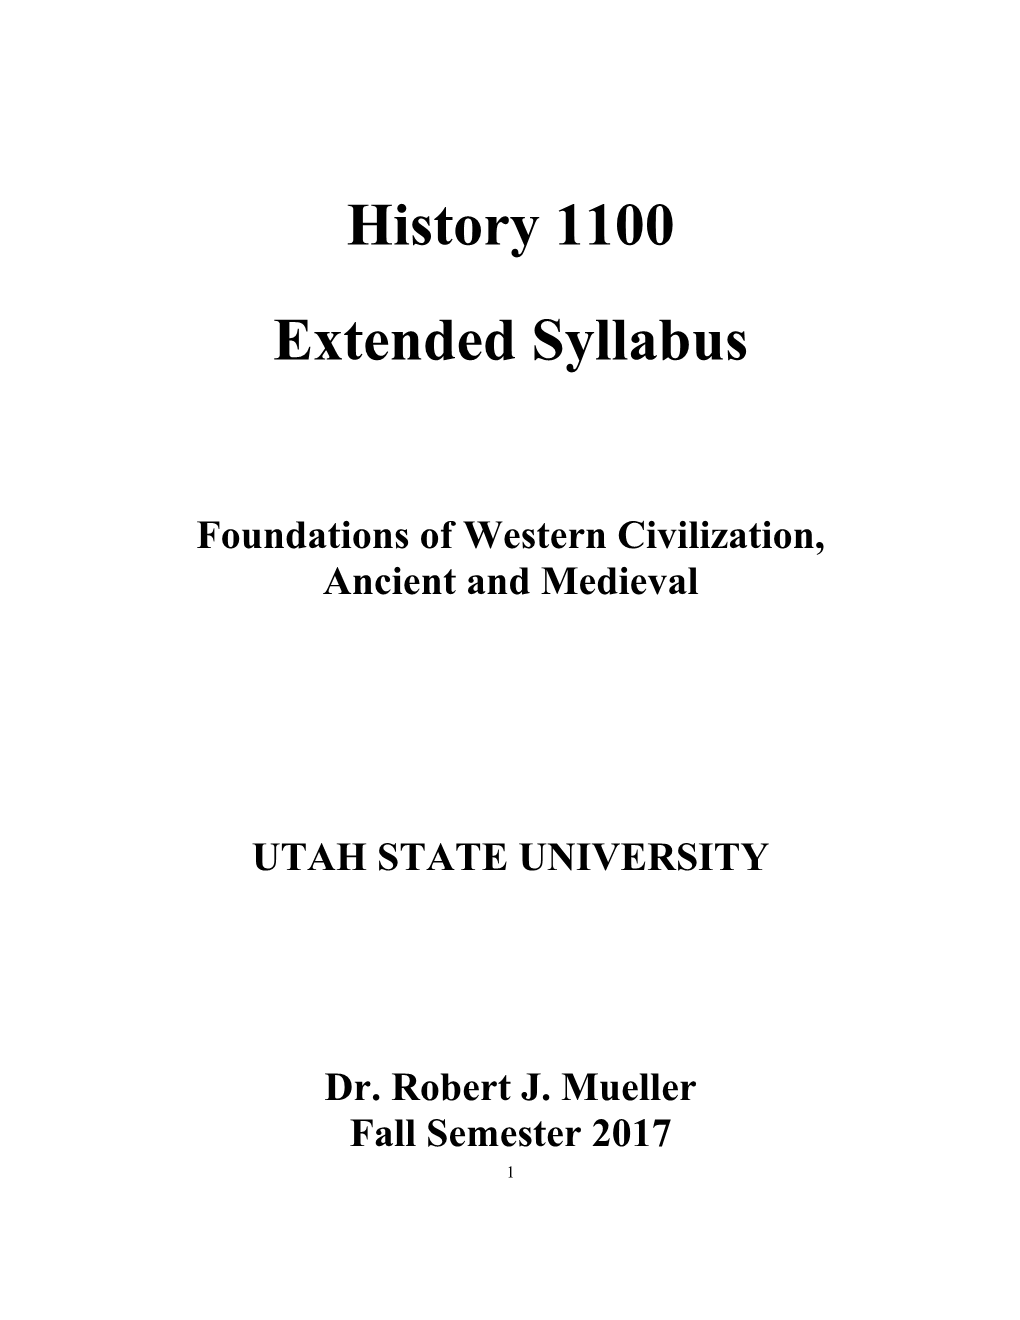 History 1100 Extended Syllabus